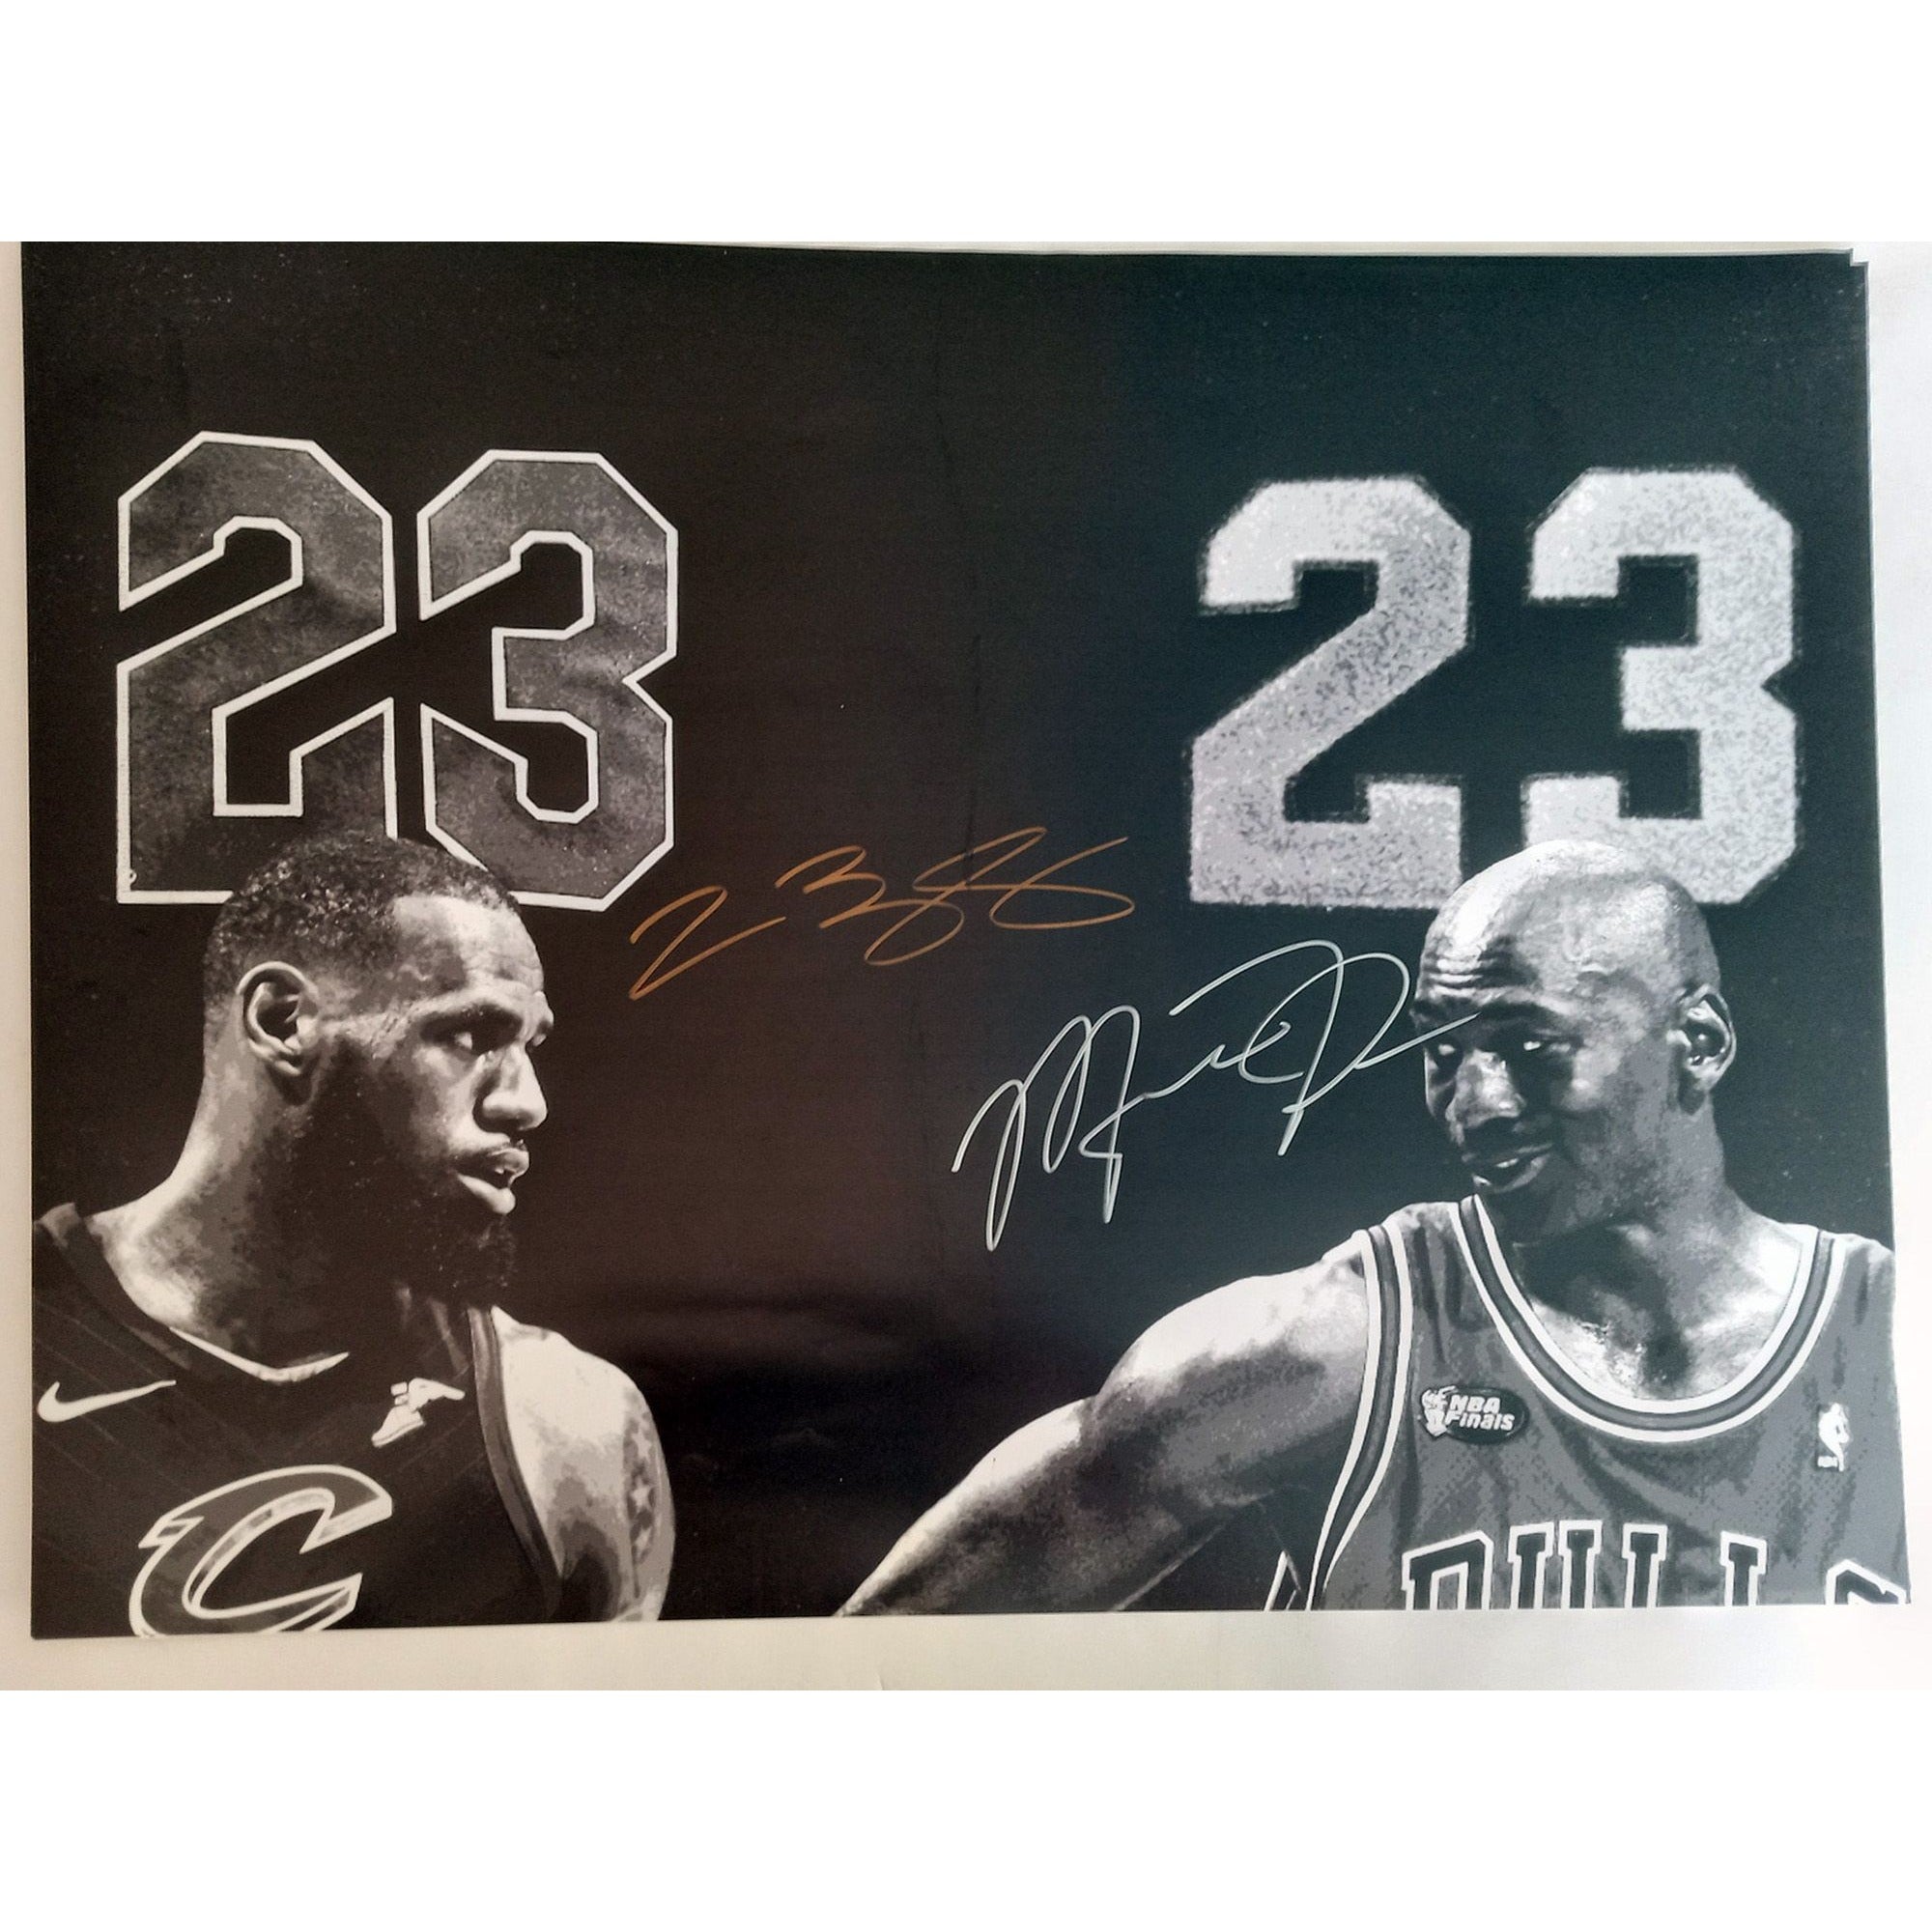 Michael Jordan and LeBron James 16 x 20 signed  with proof